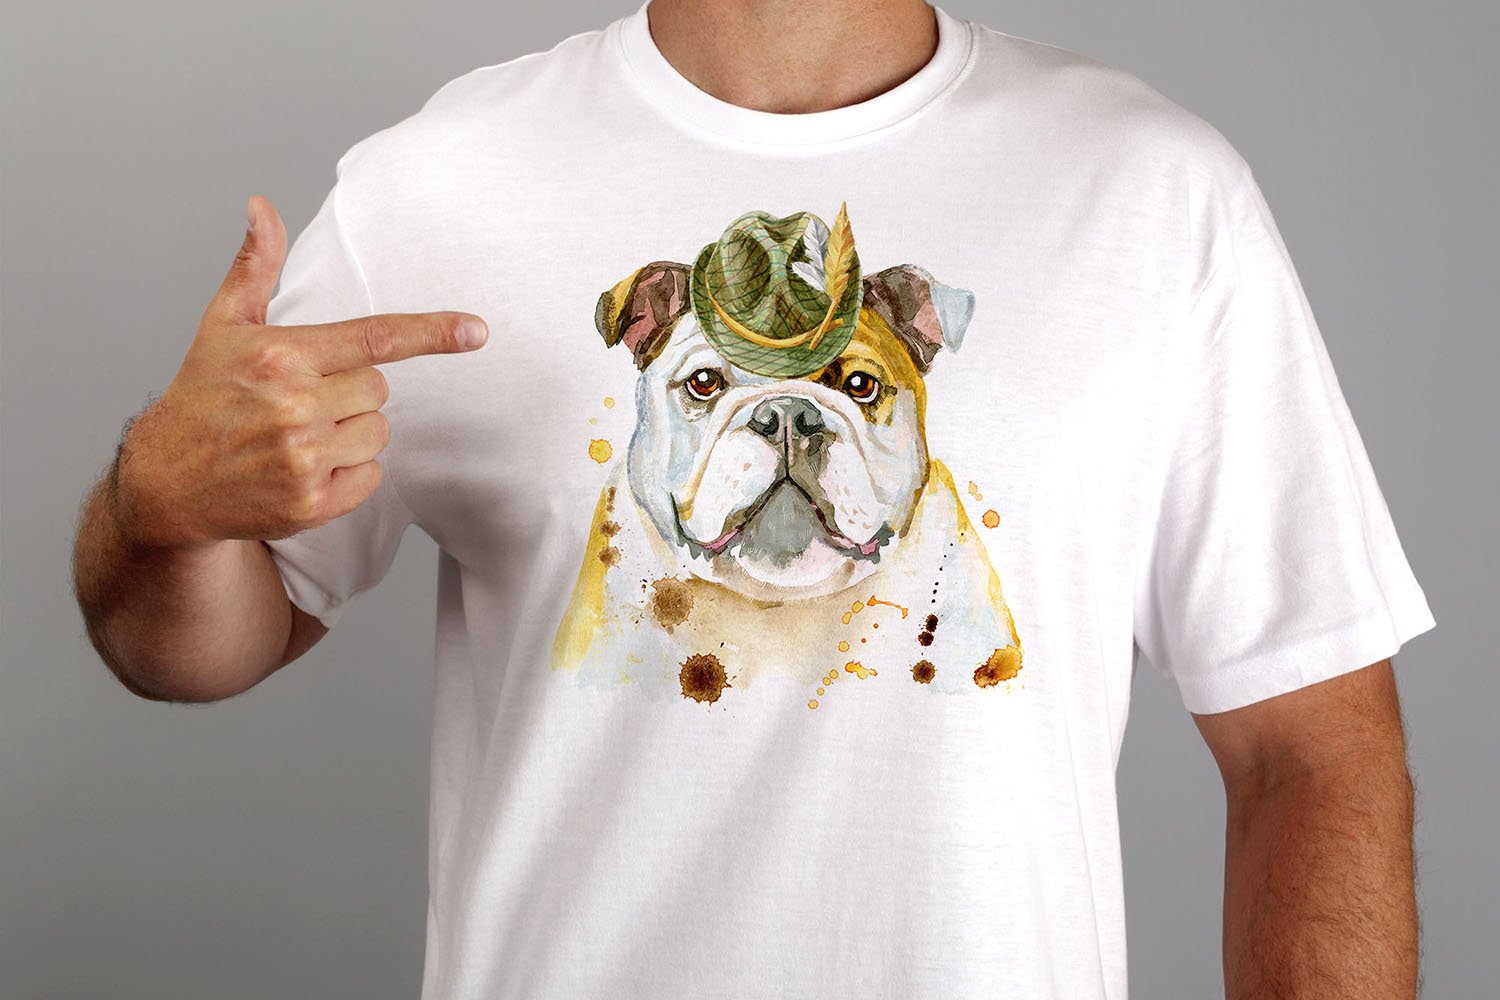 Man wearing a t - shirt with a picture of a dog on it.